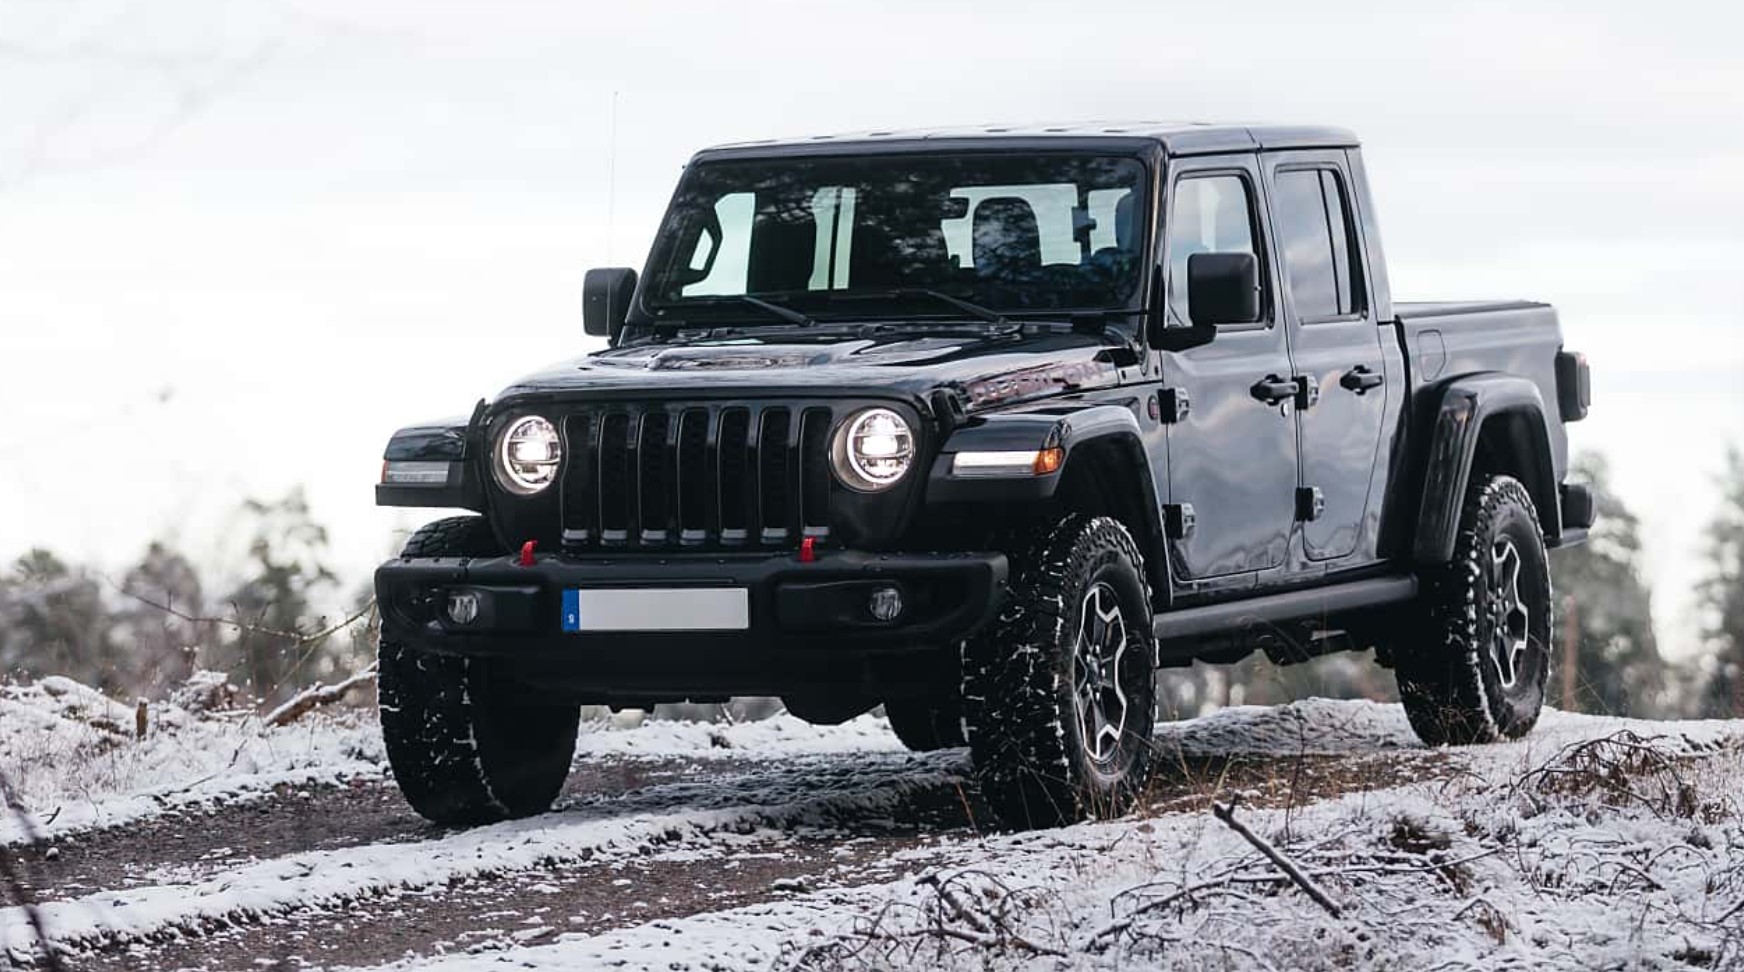 Fichiers Tuning Haute Qualité Jeep Gladiator 3.0 V6 EcoDiesel 264hp